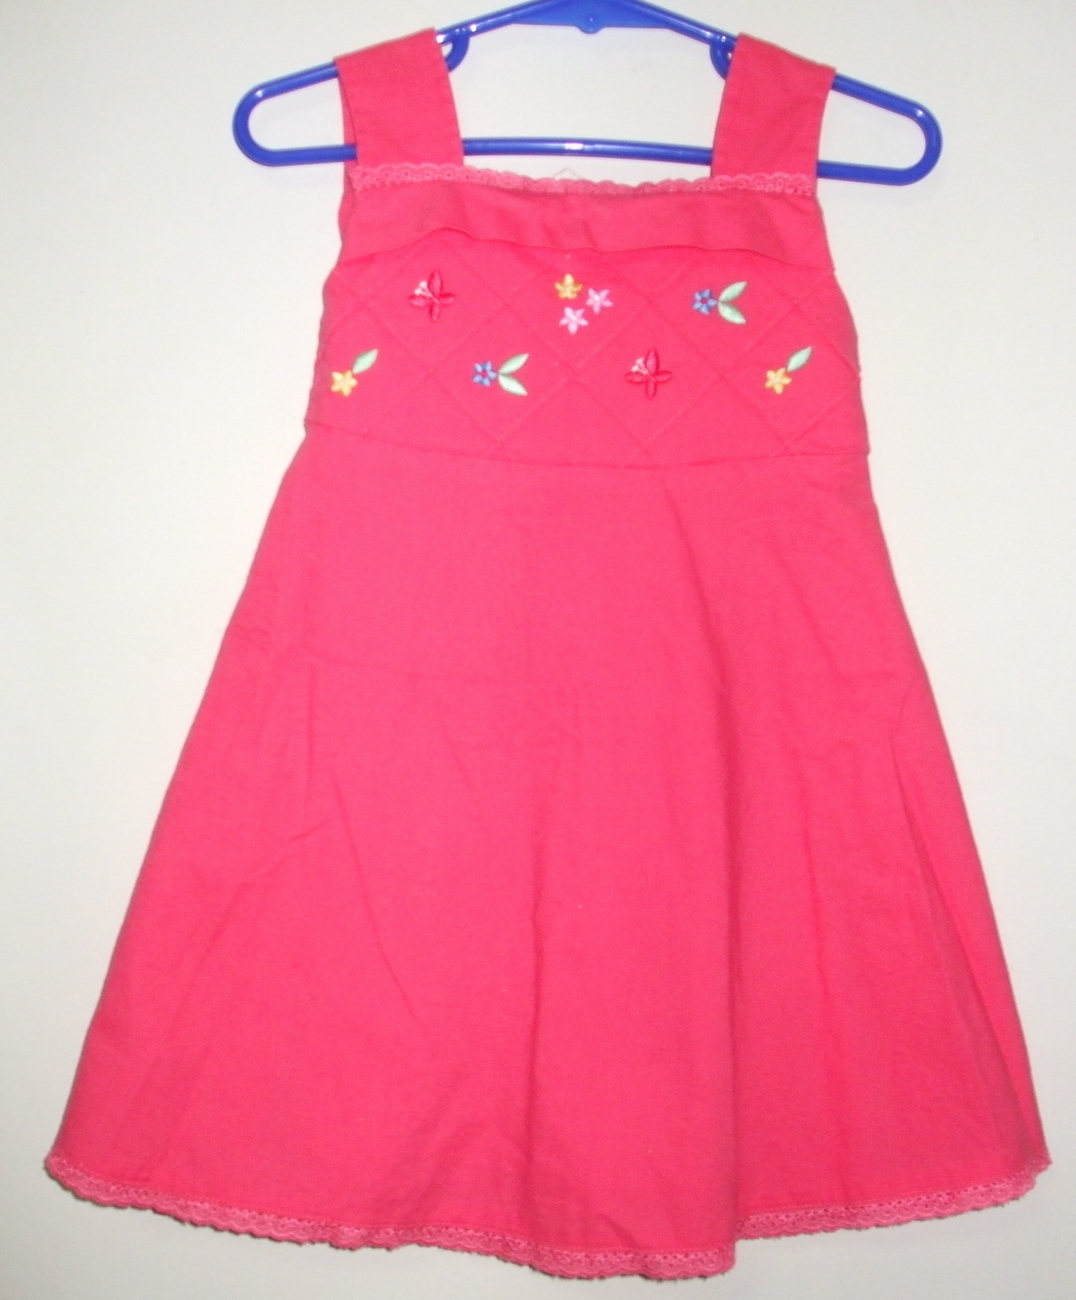 Primary image for Bonnie Jean Girls Pink Sleeveless Dress Toddler Size 3T